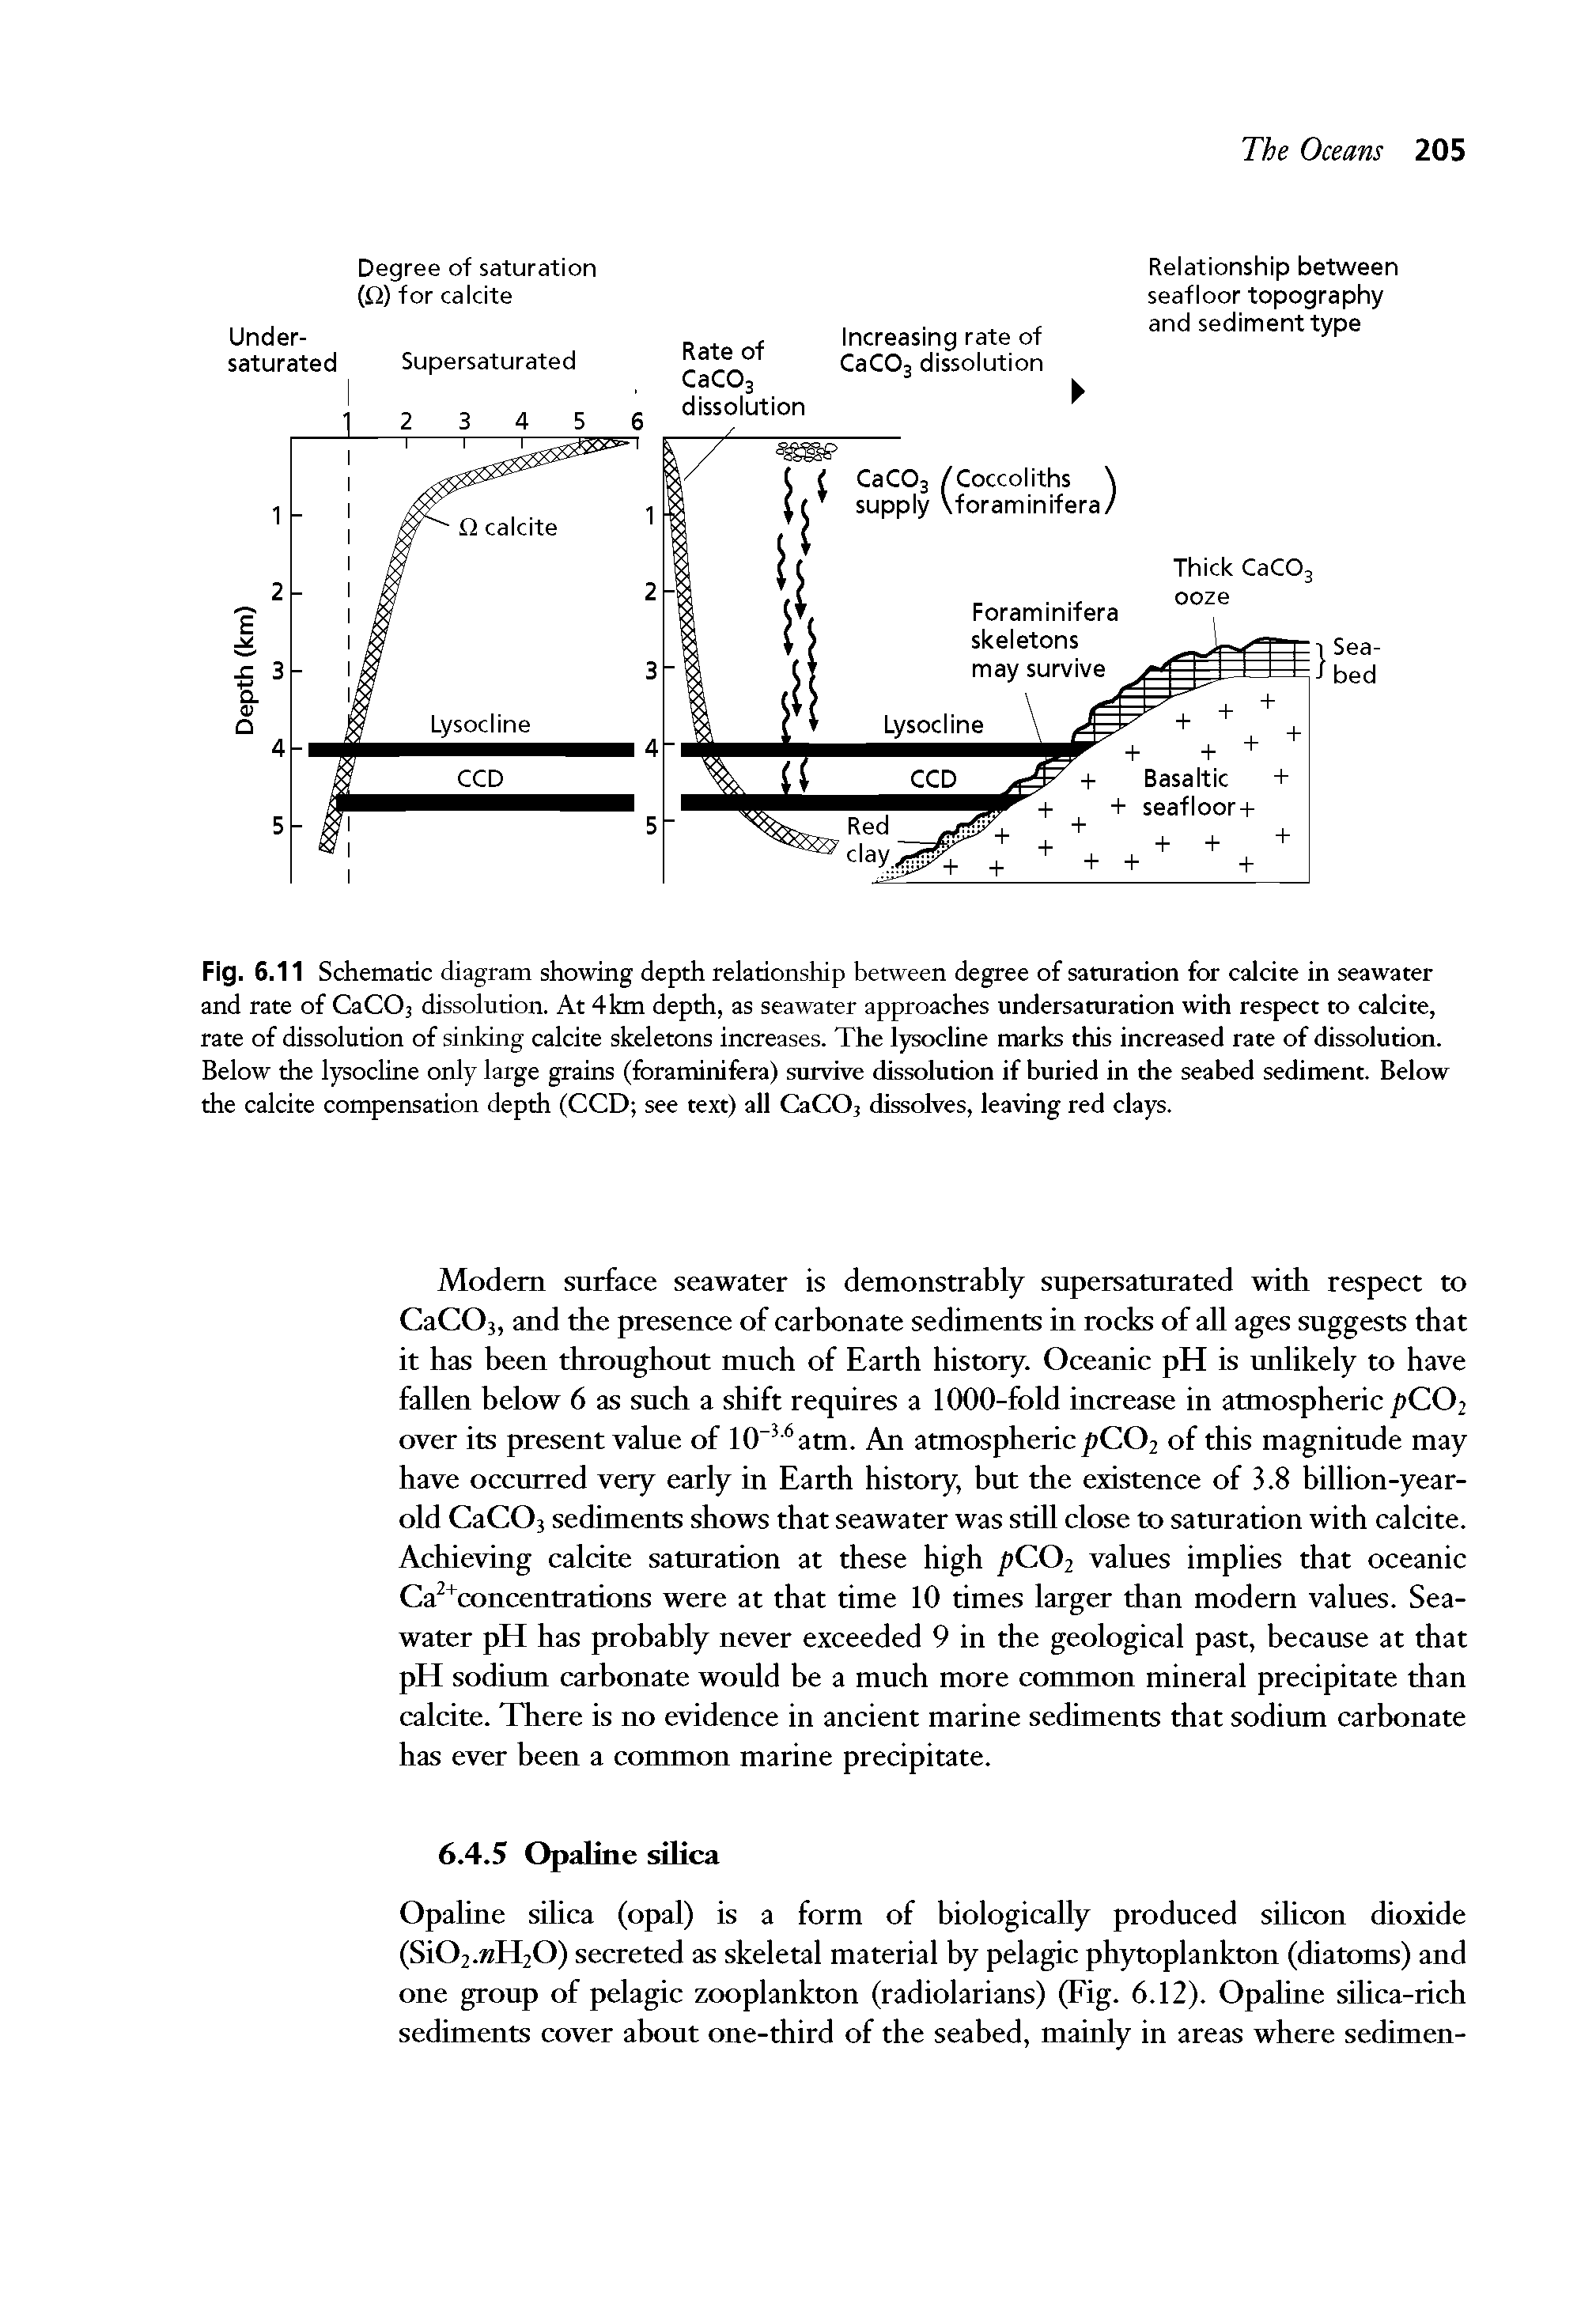 Fig. 6.11 Schematic diagram showing depth relationship between degree of saturation for calcite in seawater and rate of CaC03 dissolution. At 4km depth, as seawater approaches undersaturation with respect to calcite, rate of dissolution of sinking calcite skeletons increases. The lysocline marks this increased rate of dissolution. Below the lysocline only large grains (foraminifera) survive dissolution if buried in the seabed sediment. Below the calcite compensation depth (CCD see text) all CaC03 dissolves, leaving red clays.